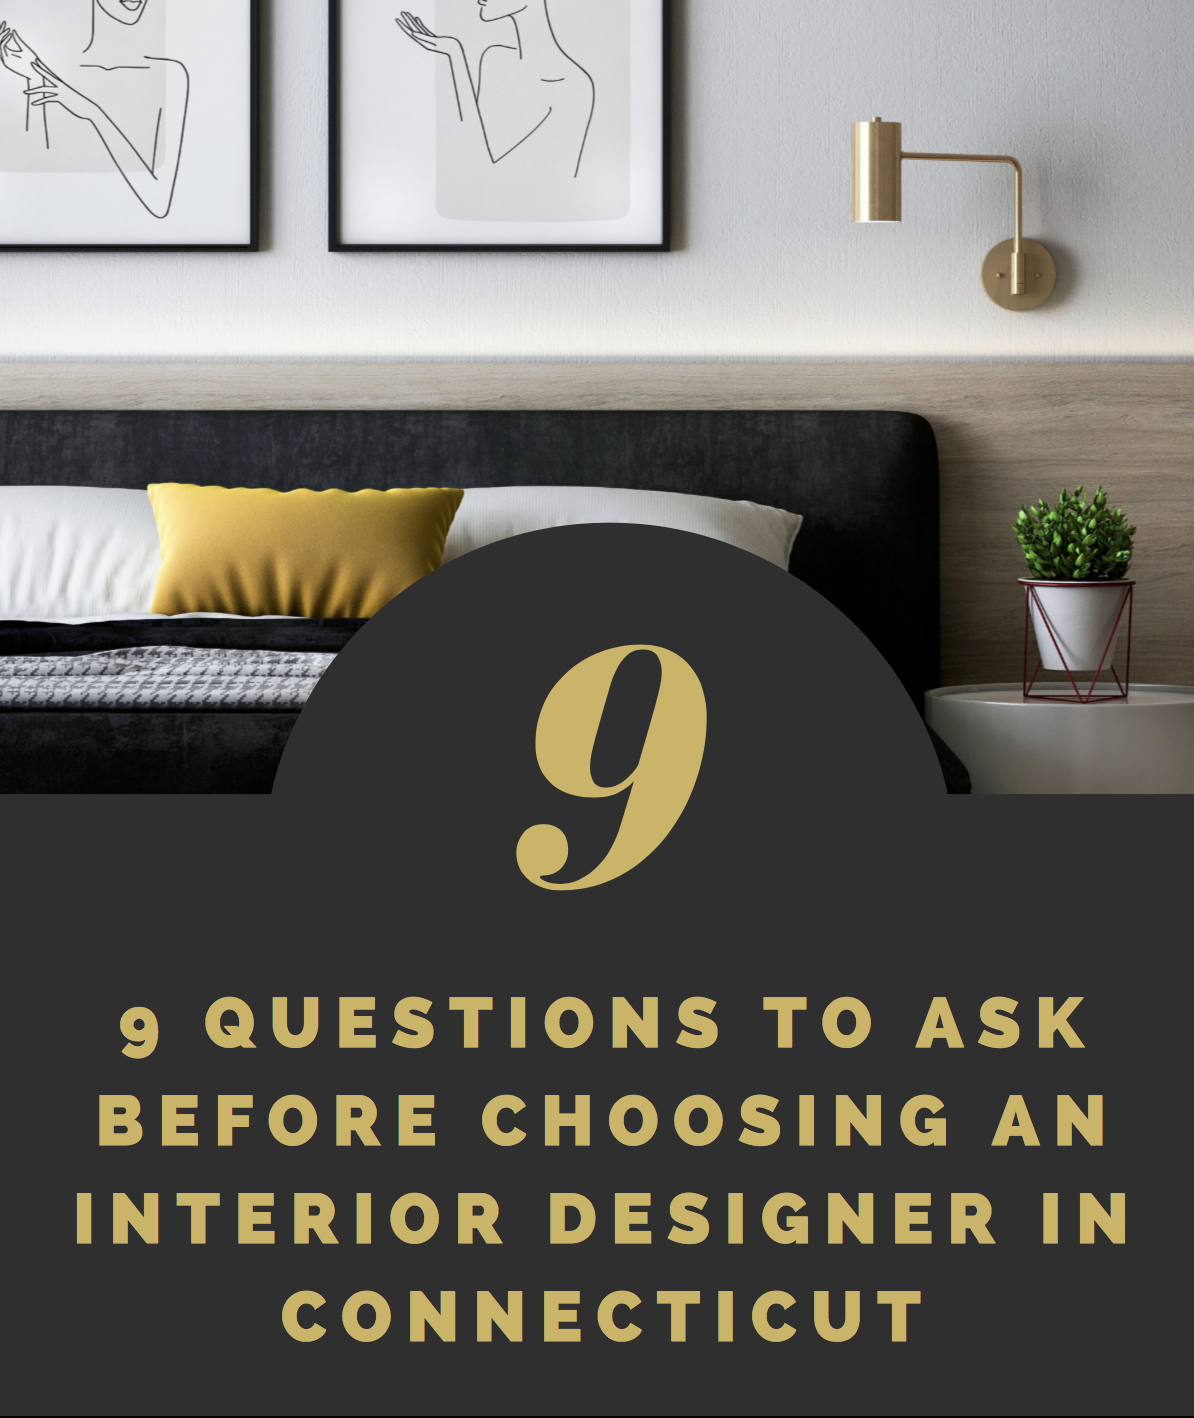 9 Questions to Ask Before Choosing an Interior Designer in Connecticut